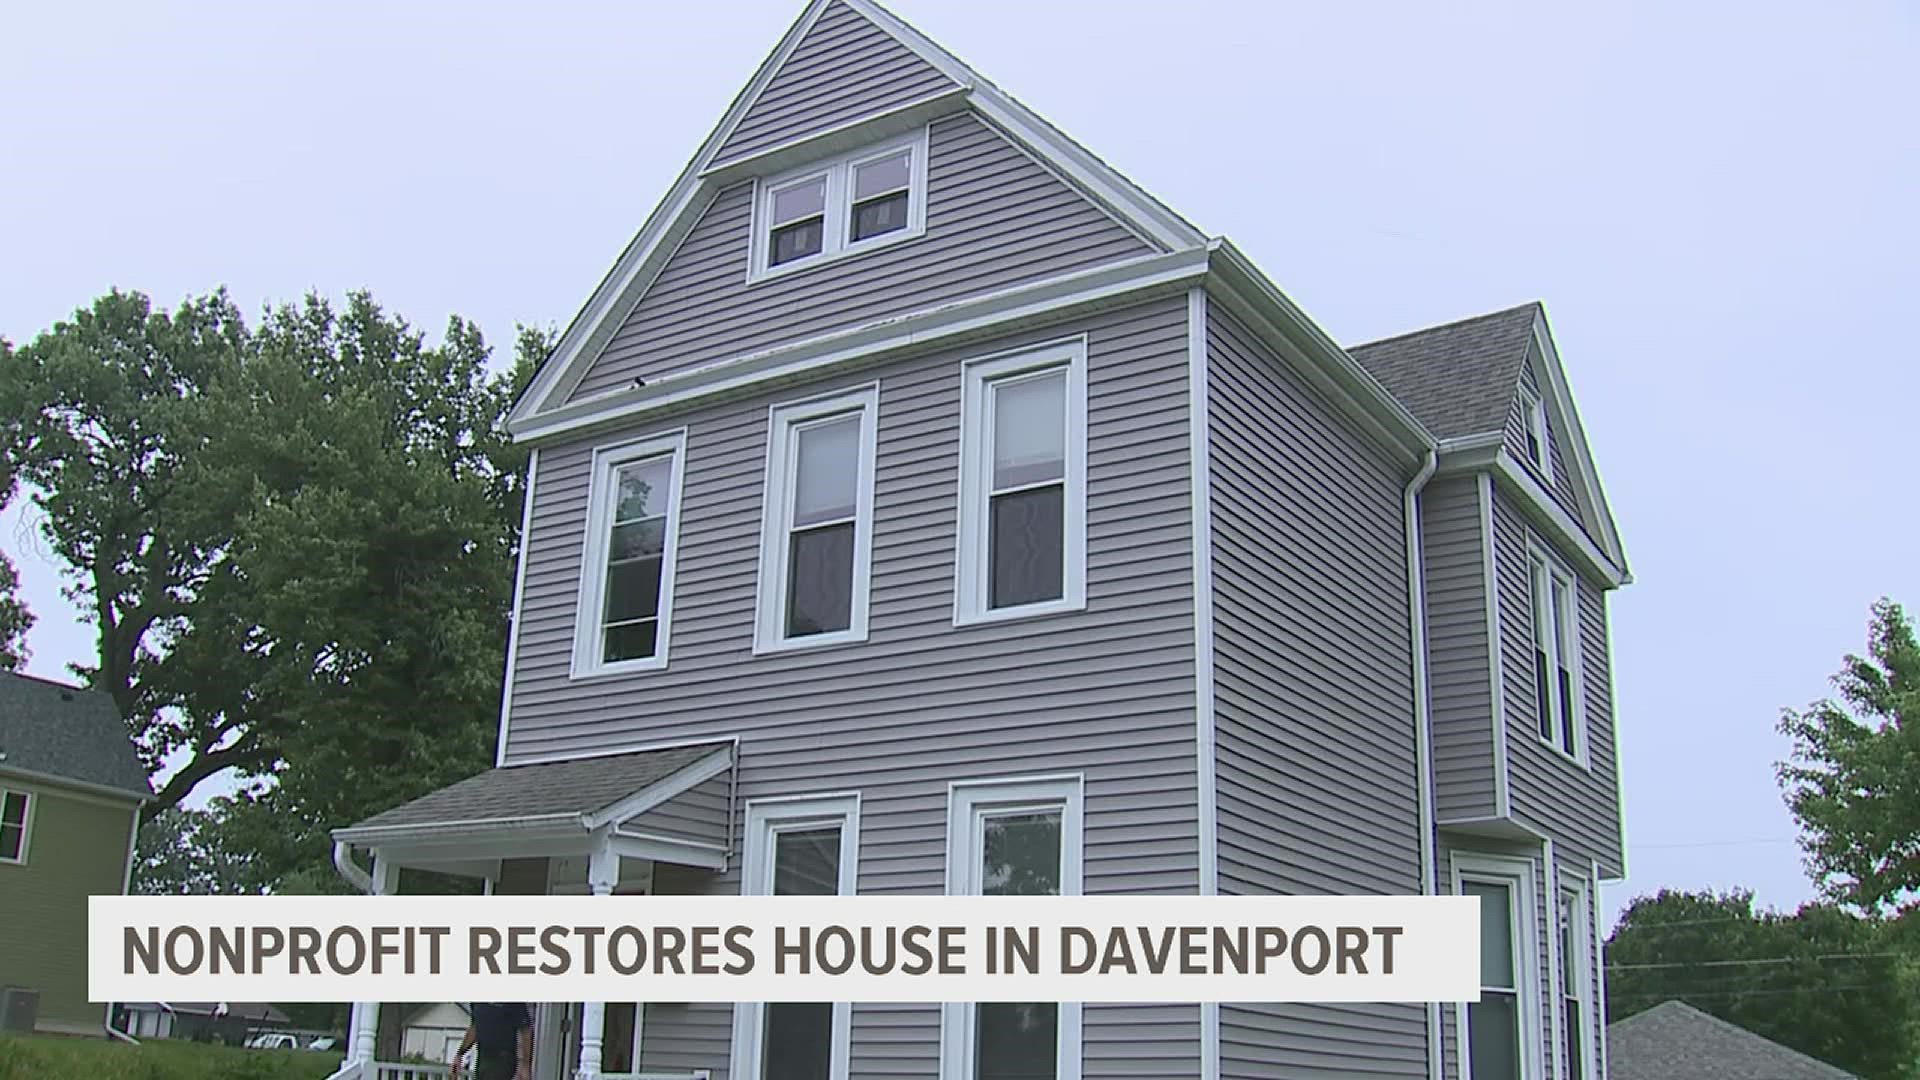 Rejuvenate Housing closed on their first restored property on Thursday with help from Quad Cities Bank and Trust.